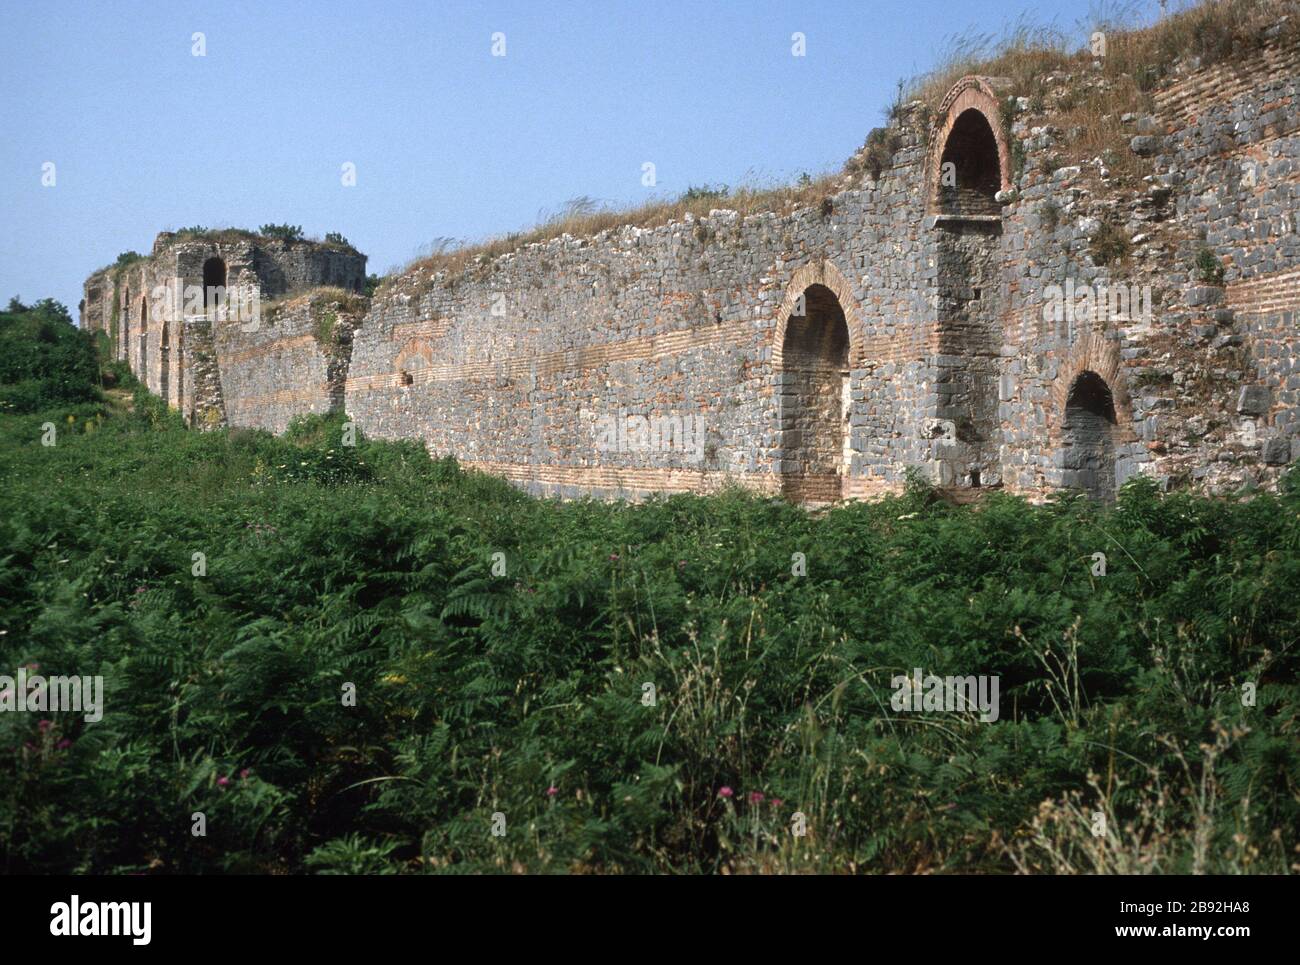 Walls of the ancient city of Nicopolis, built by Augustus Caesar (formerly Octavian) to commemorate his victory over the fleets of Mark Antony and Cleopatra in the naval battle of Actium, which took place nearby. Near Preveza, Epirus, Greece. Nicopolis has tentative status as a UNESCO World Heritage Site. Stock Photo